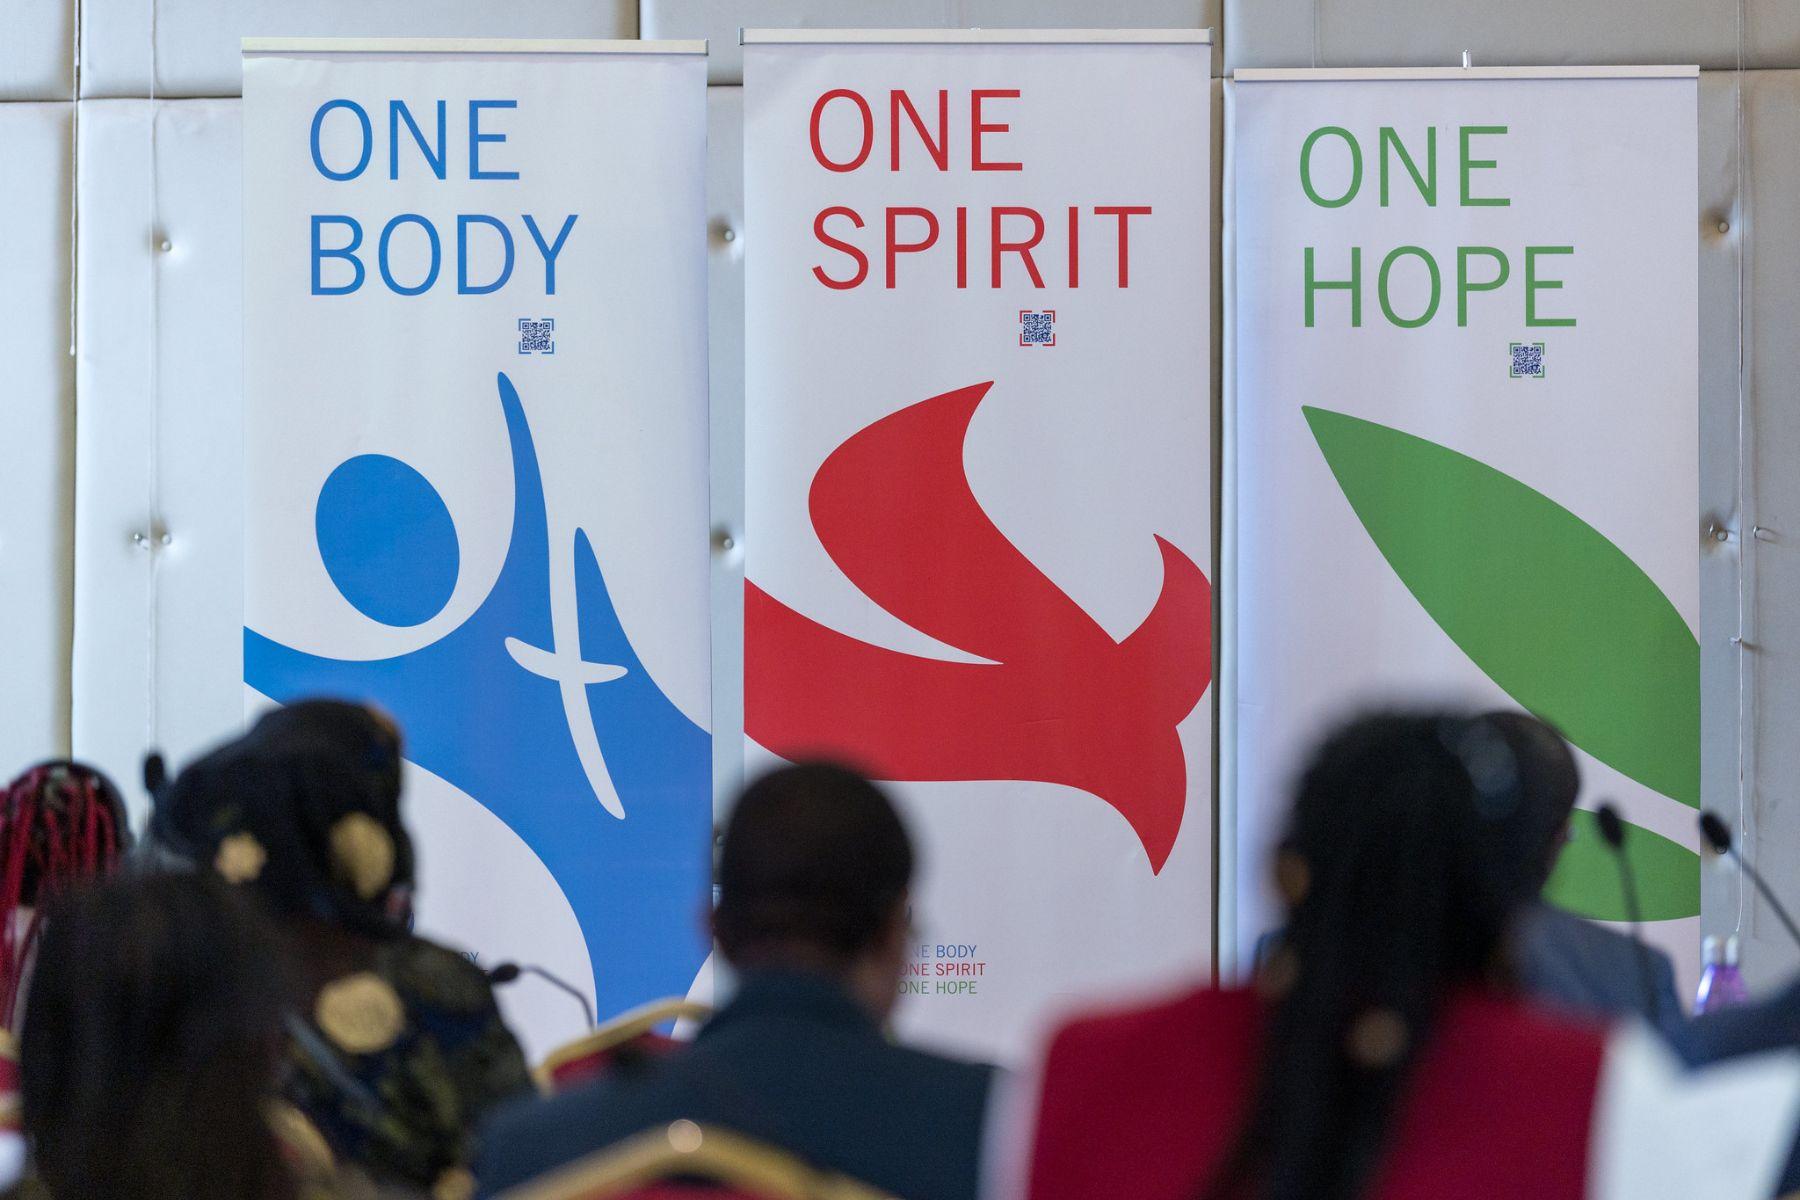 Lutherans from across the world will gather at the youth, women and men's pre-Assemblies to discern the Assembly theme 'One body, One spirit, One hope' days before the Thirteenth Assembly in Krakow, Poland. Photo: LWF/Albin Hillert